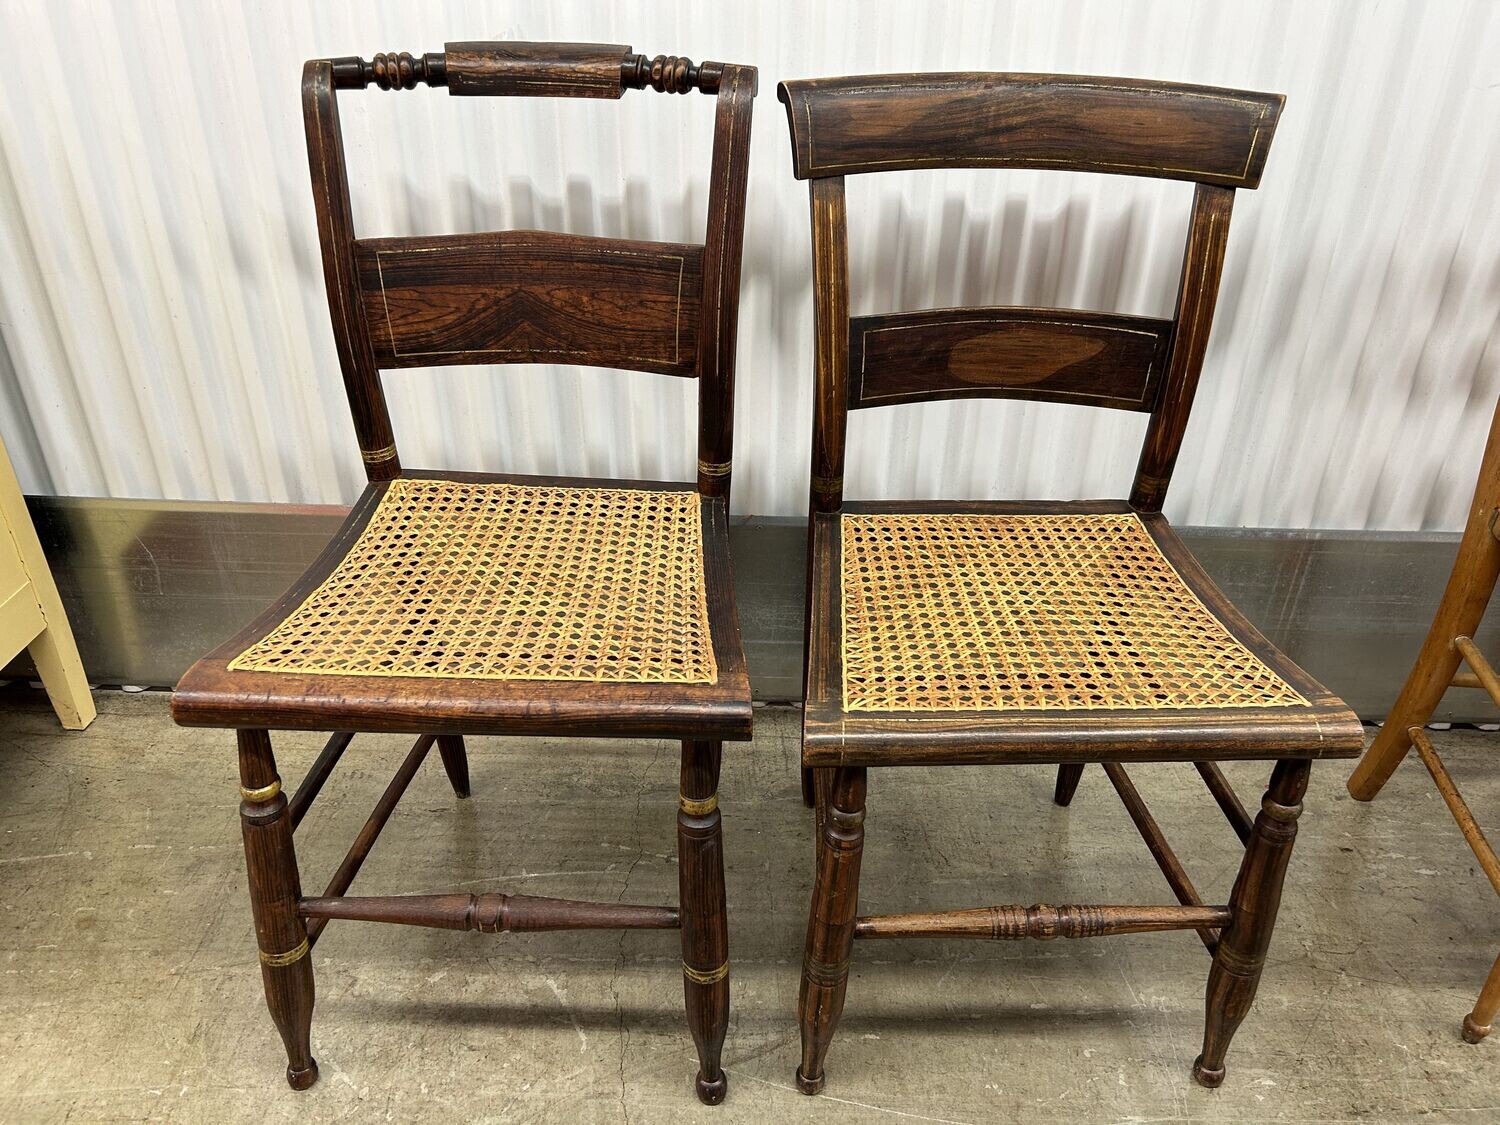 Pair of Brown Antique Chairs, caned seats #2125